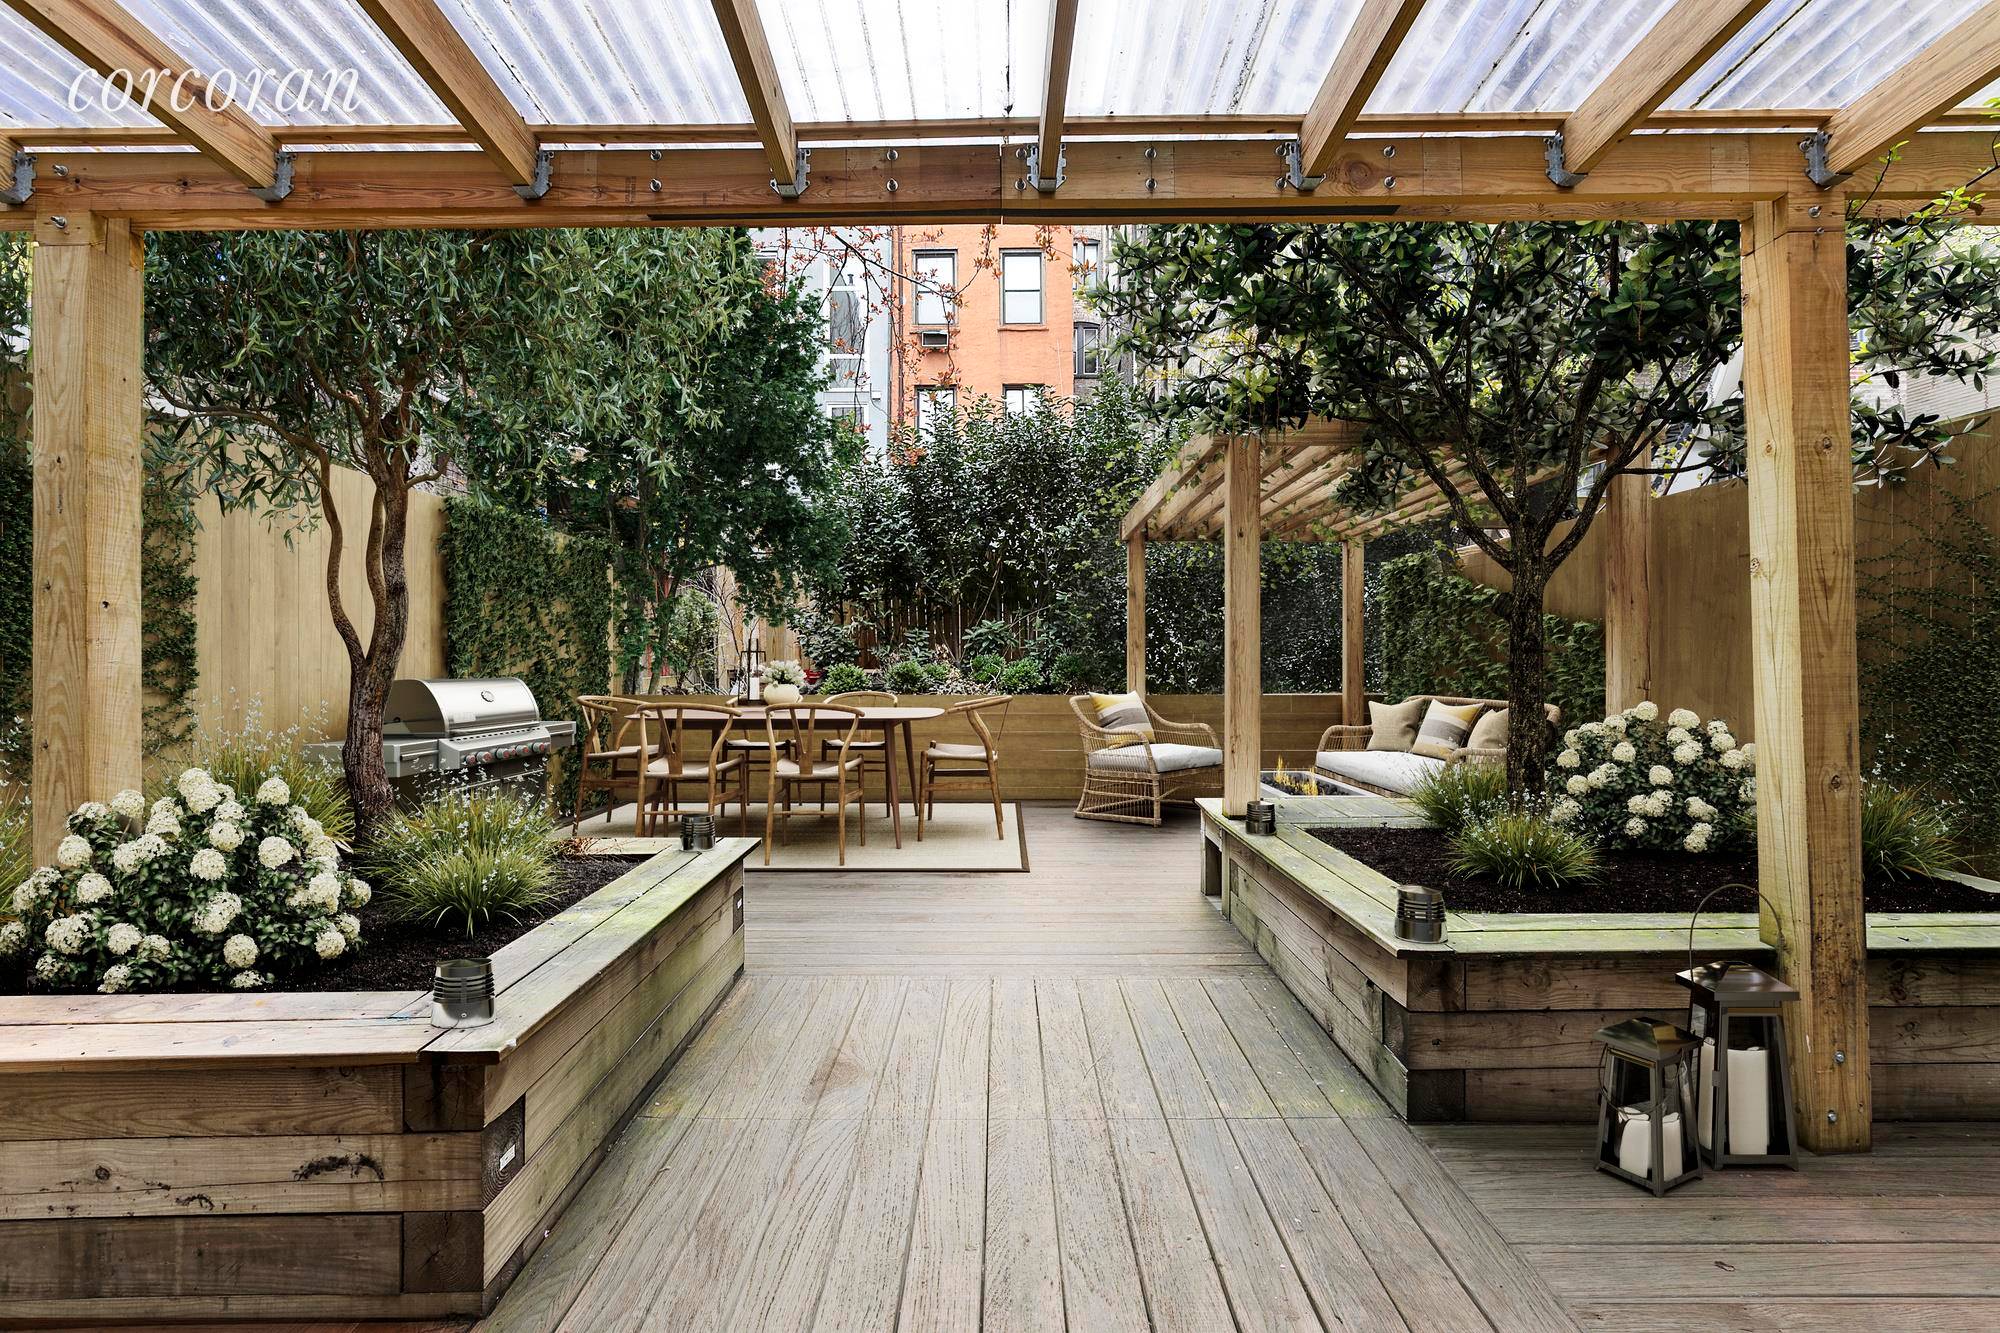 The Garden Apartment at 245 West 24th Street is a private oasis in the happening heart of Chelsea.